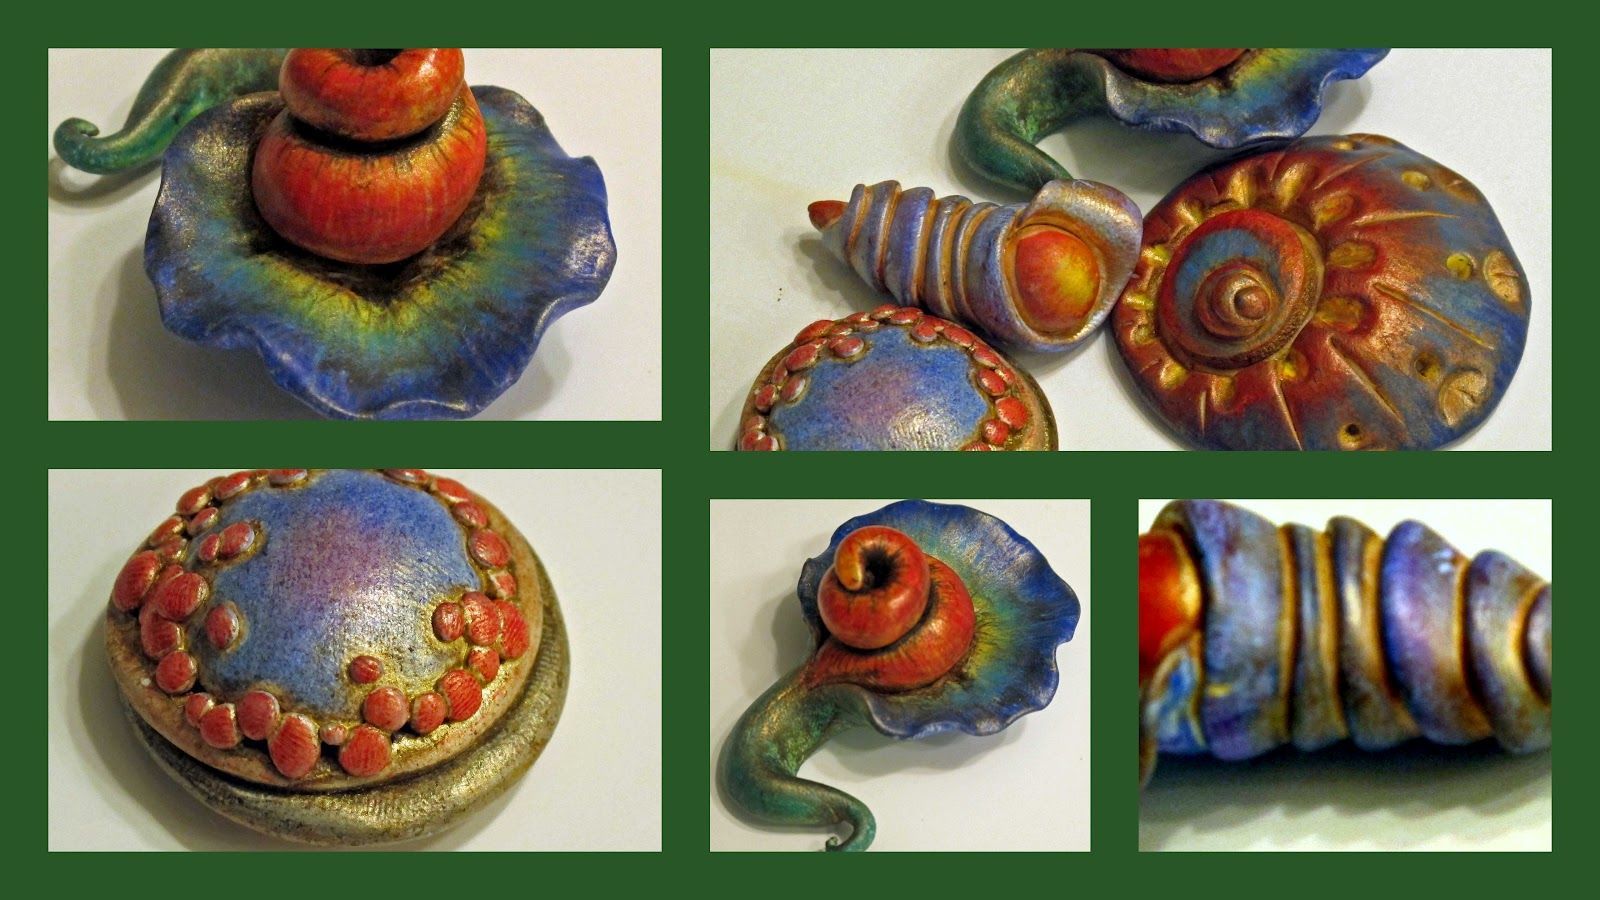 Coloured pencils (Prismacolor) on baked polymer clay. Maria Clark explains &quot